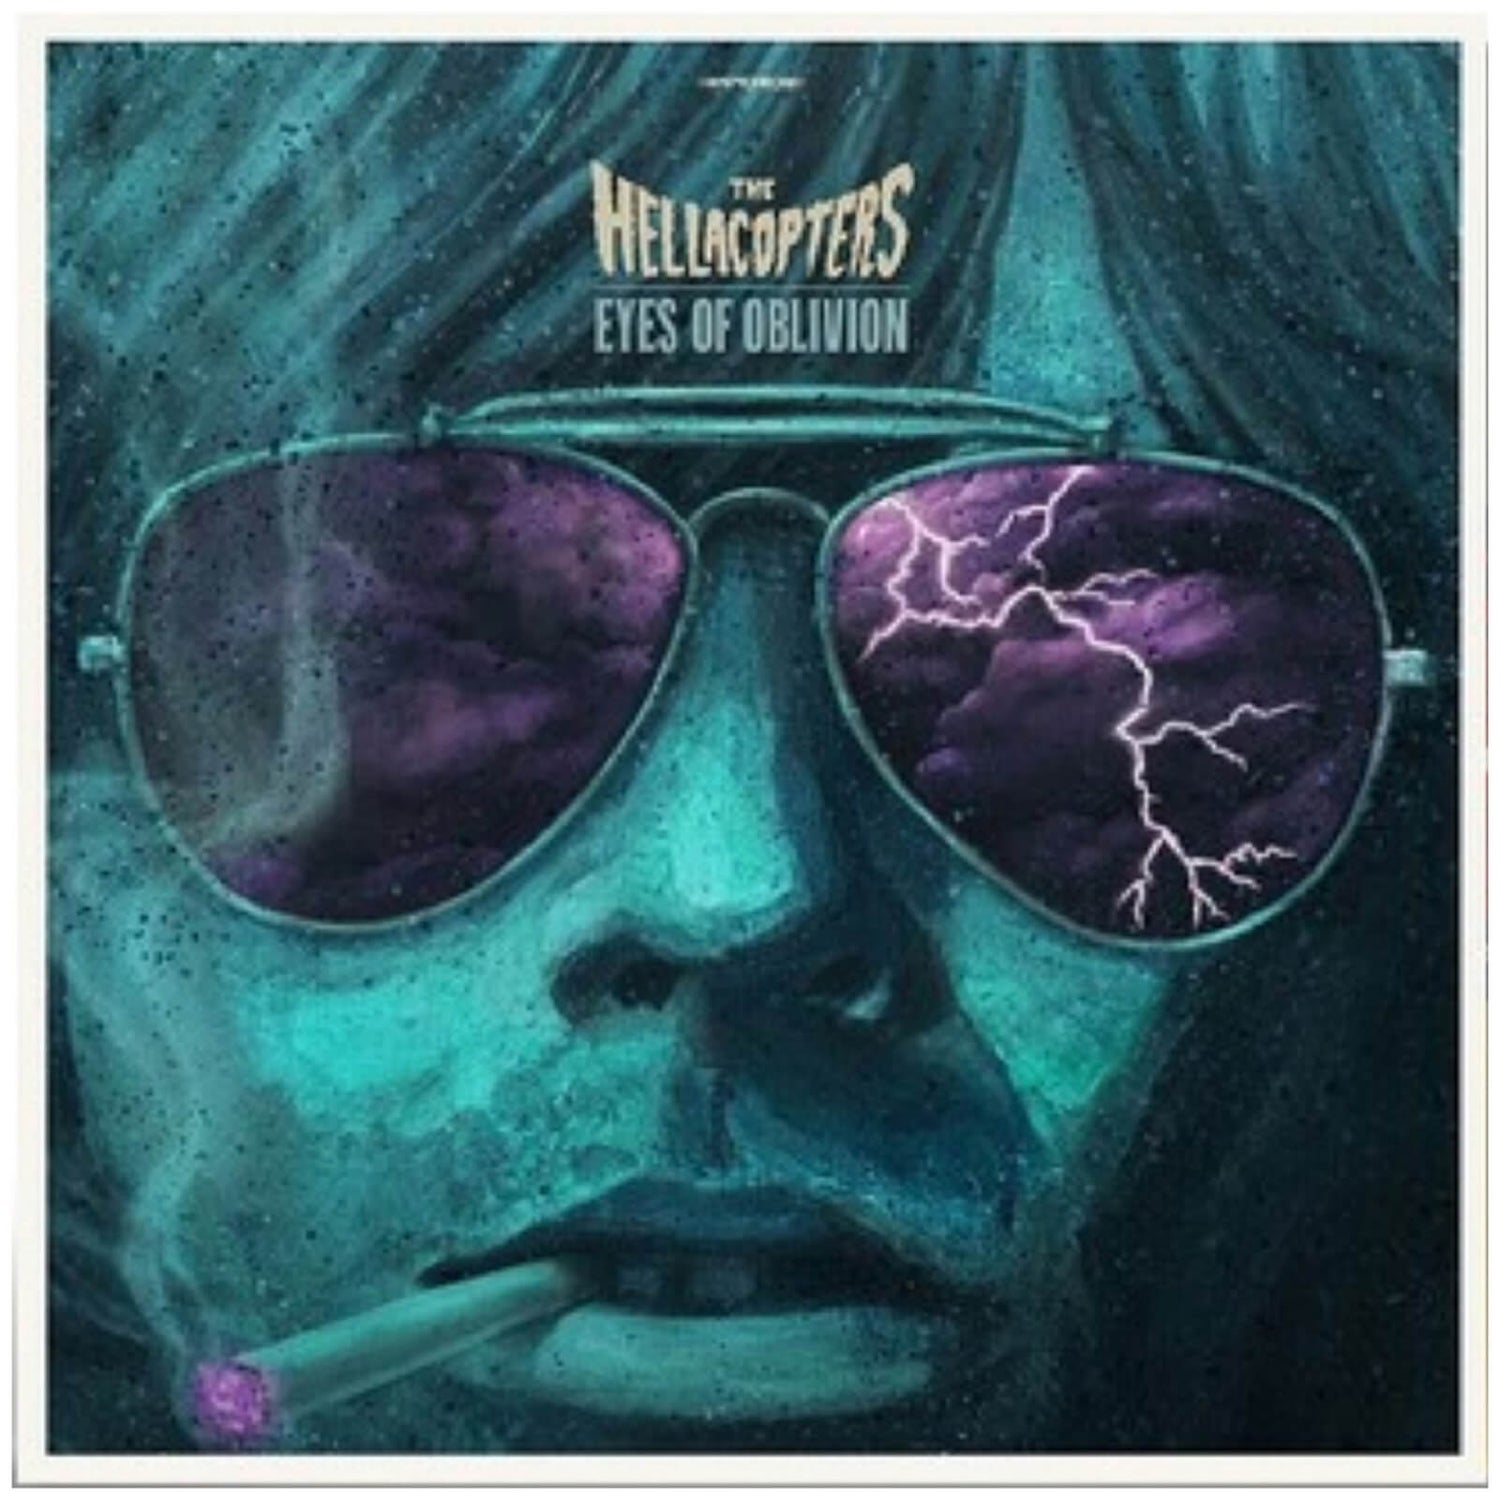 The Hellacopters - Eyes Of Oblivion Vinyl (Silver & Gold)